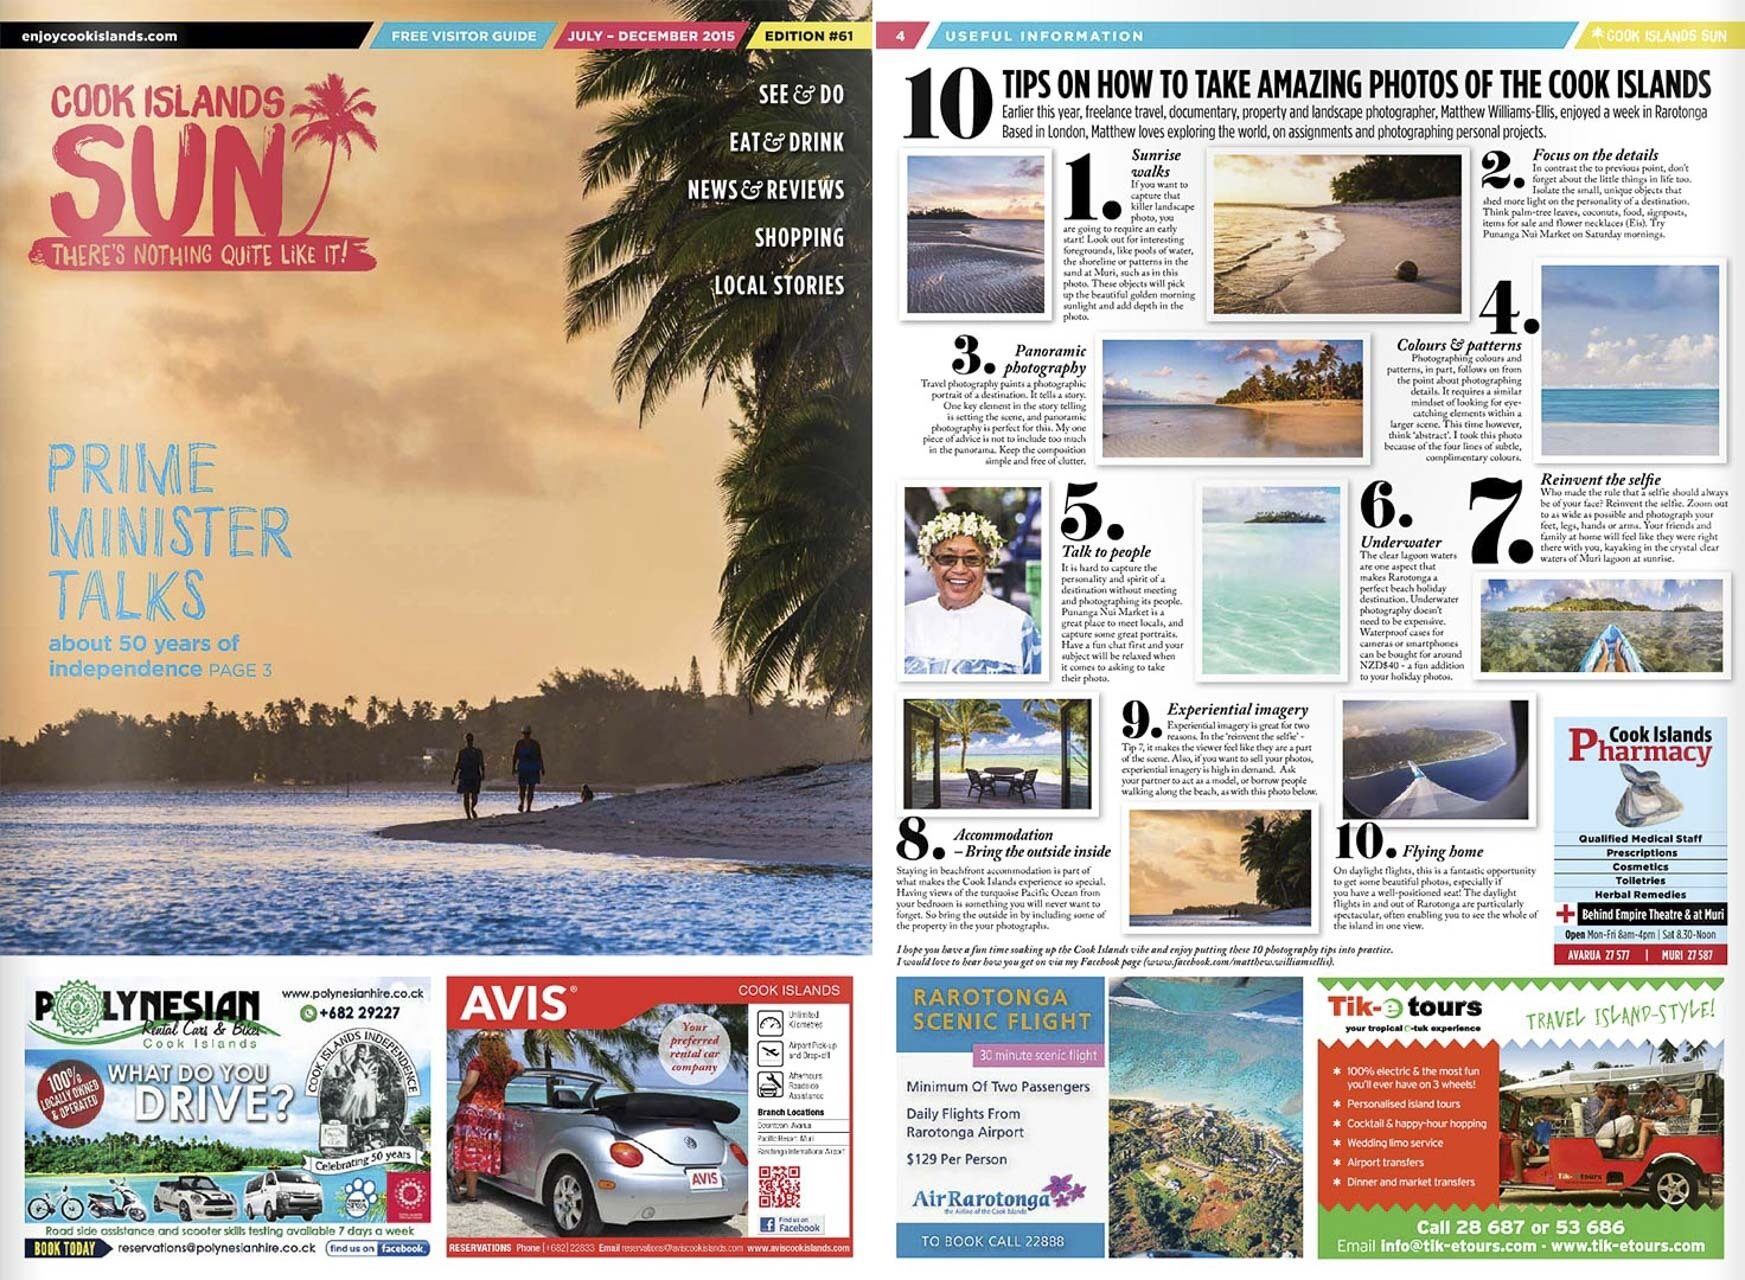 Cook Islands 10 tips on how to take amazing photos of the Cook Islands Tearsheet